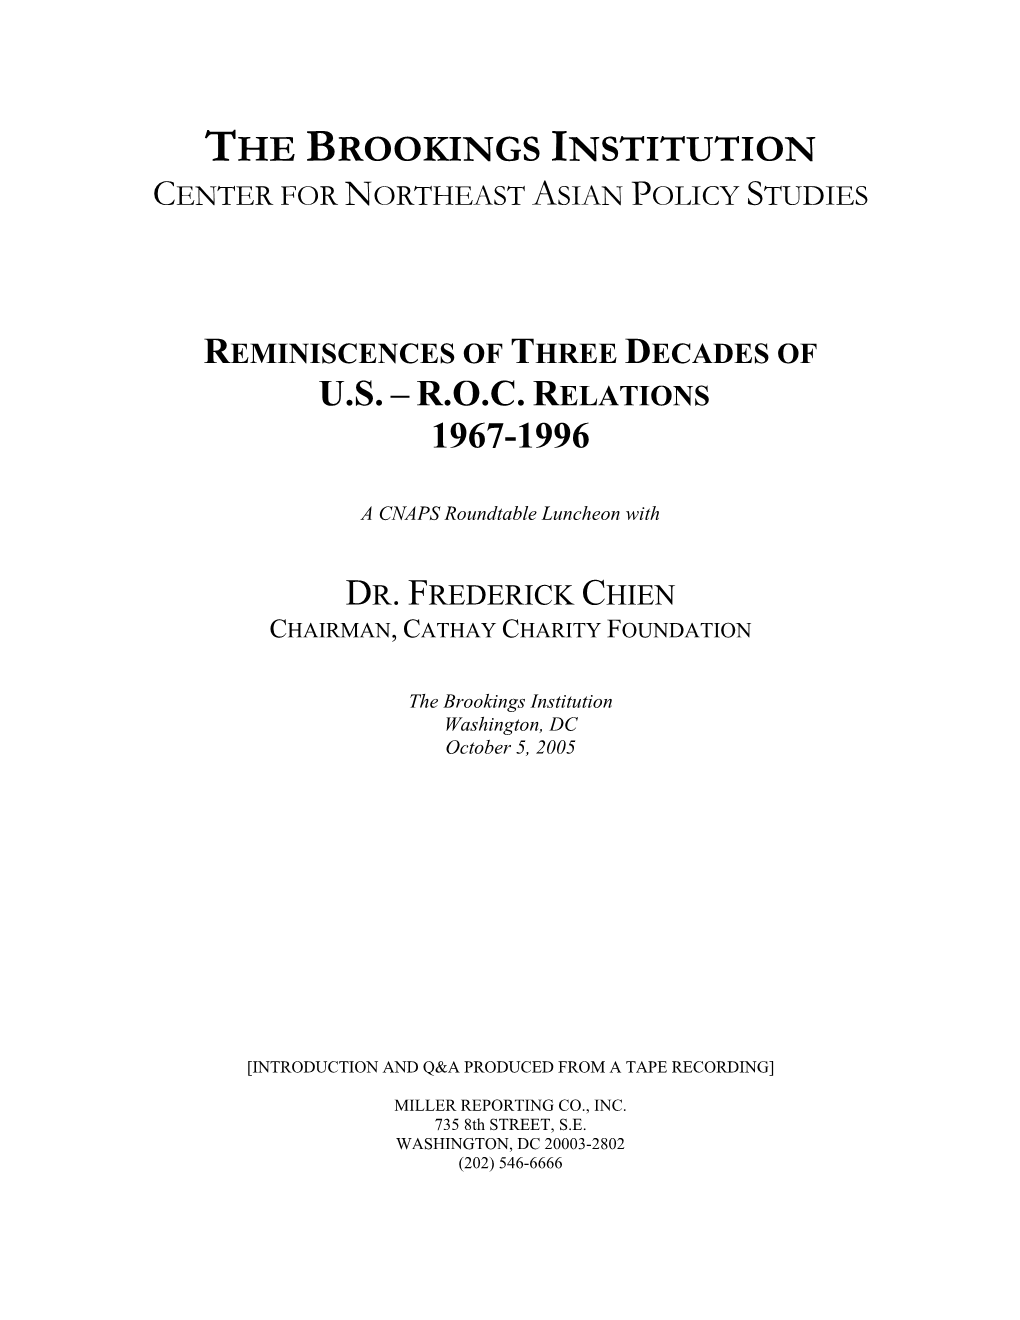 The Brookings Institution U.S. – R.O.C. R 1967-1996